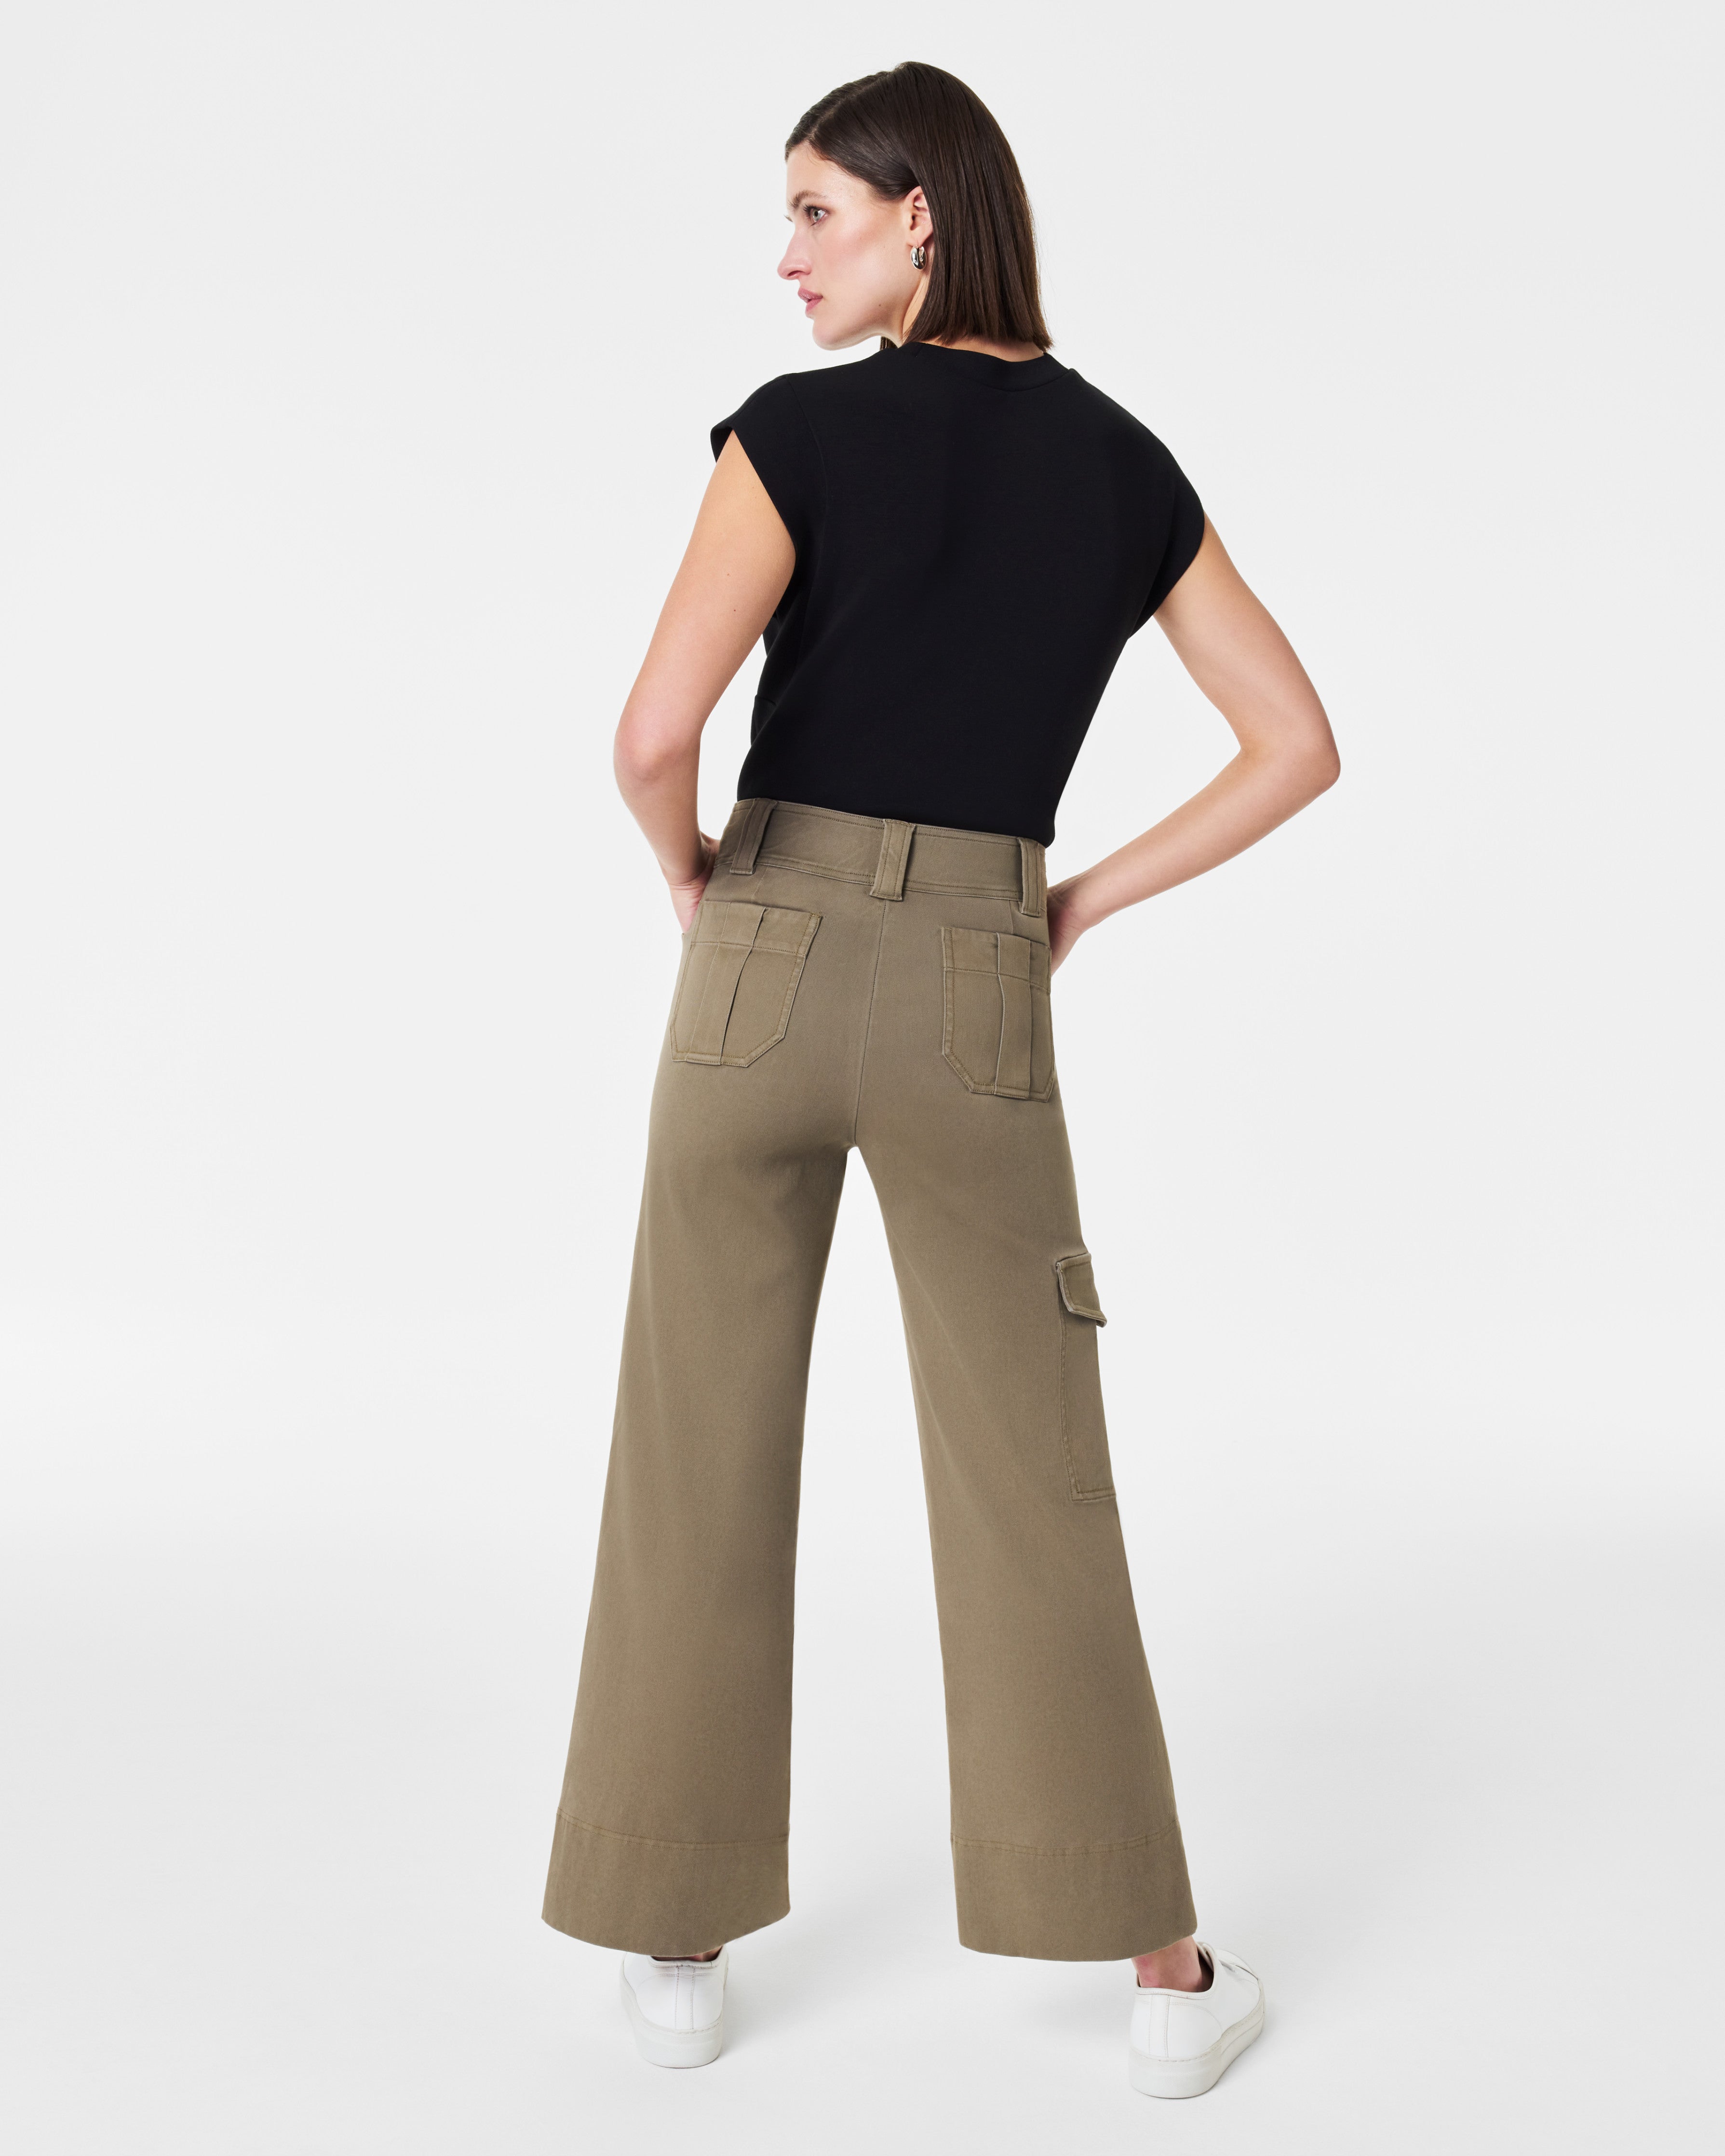 RUST & Co. - ✨New Arrival✨ Spanx stretch twill wide leg crop pant. Your new  go-to for summer. 💛